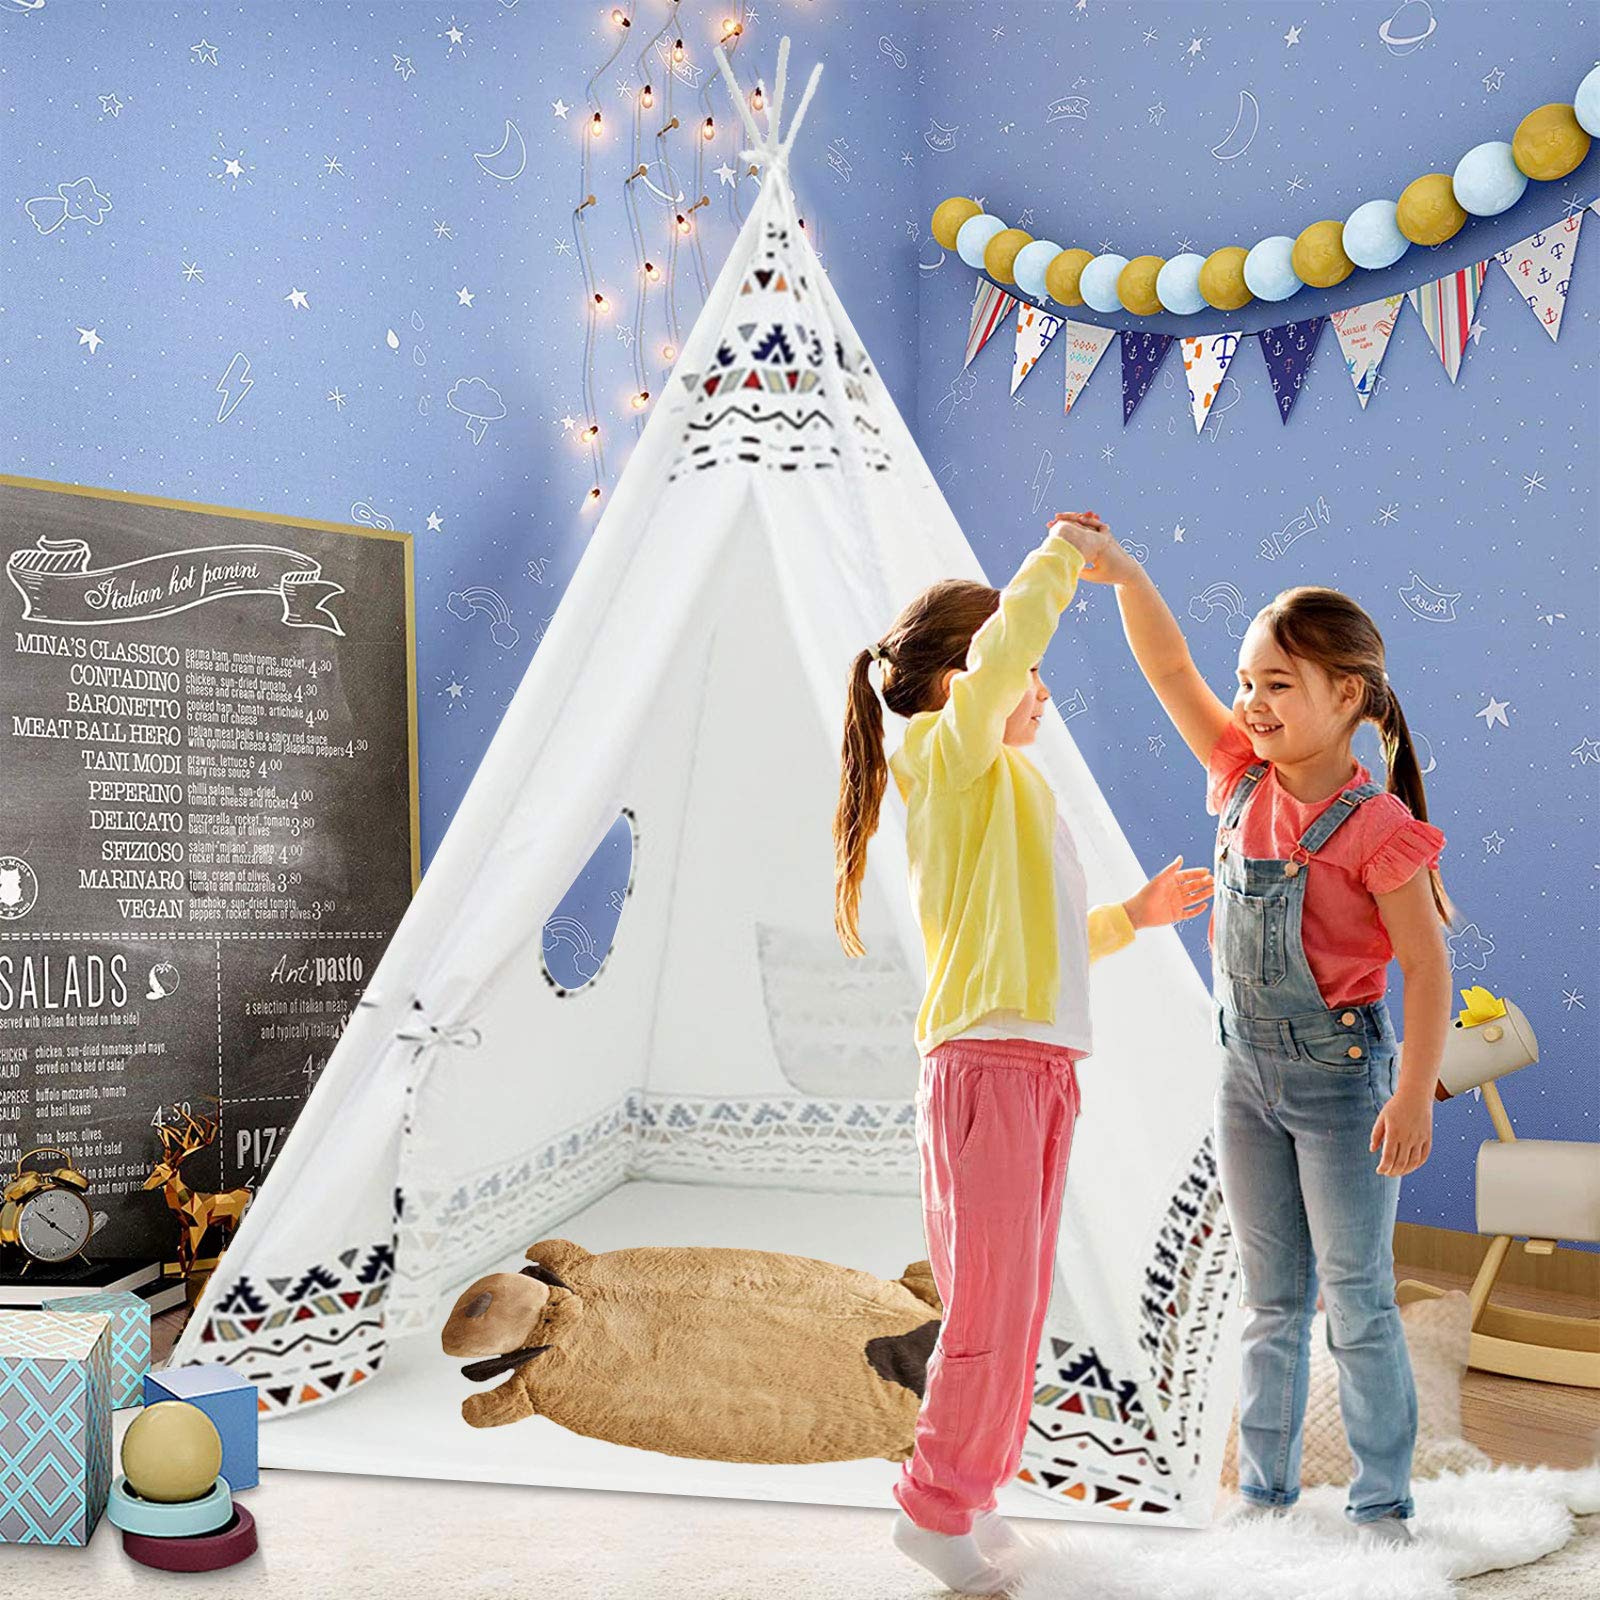 100% Original Freestanding Baby Swing - Arkmiido Teepee Tent for Kids Raw White Canvas Teepee with Windows Carry Case Foldable Children Play Tents Playhouse Toys for Baby Toddler Girls/Boys Indoor...